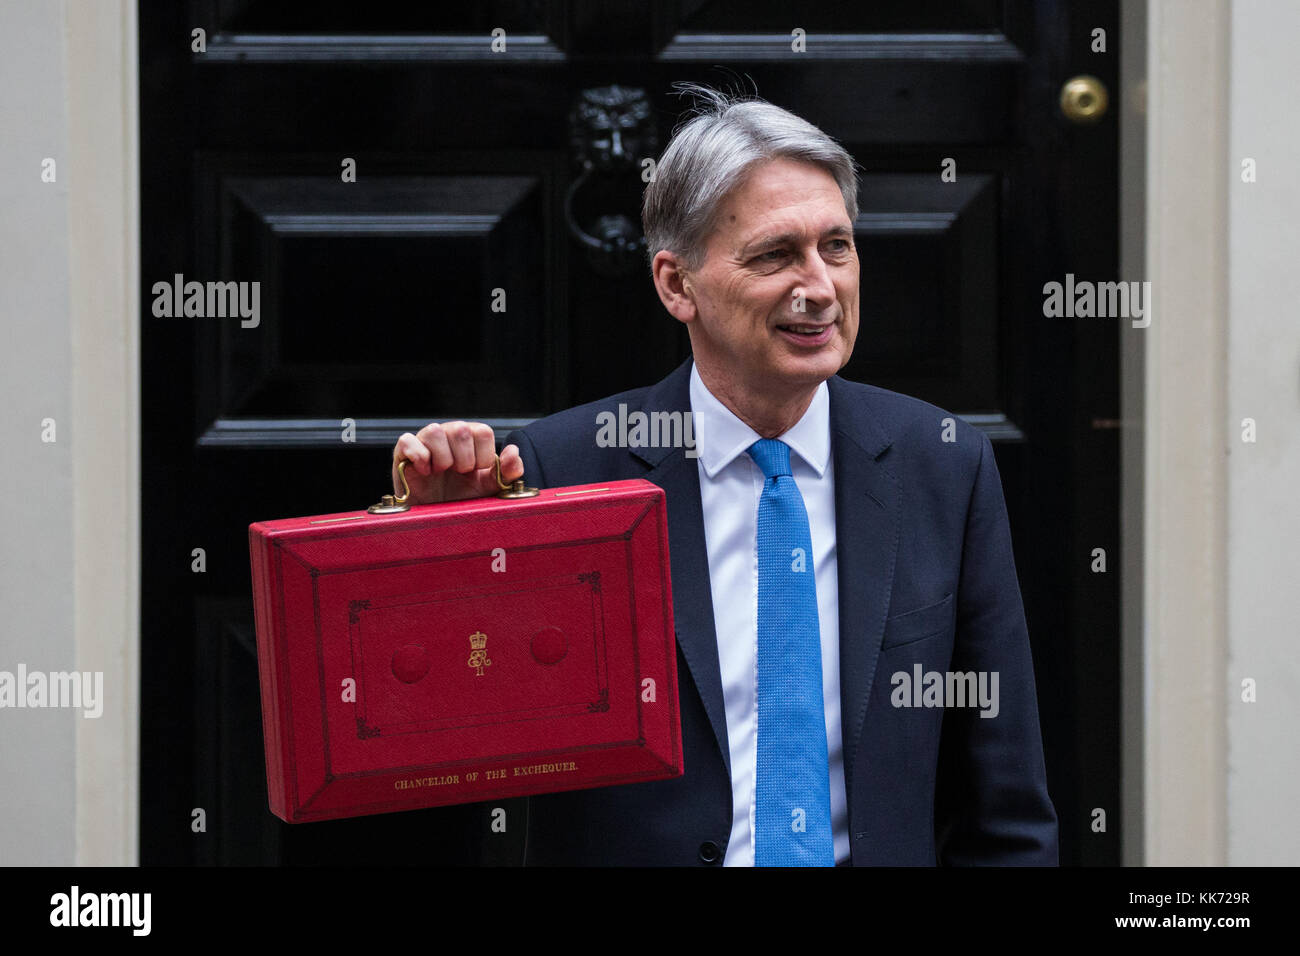 London, UK. 22nd November, 2017. Philip Hammond MP, Chancellor of the Exchequer, holds up the red case as he leaves 11 Downing Street to make his Budg Stock Photo